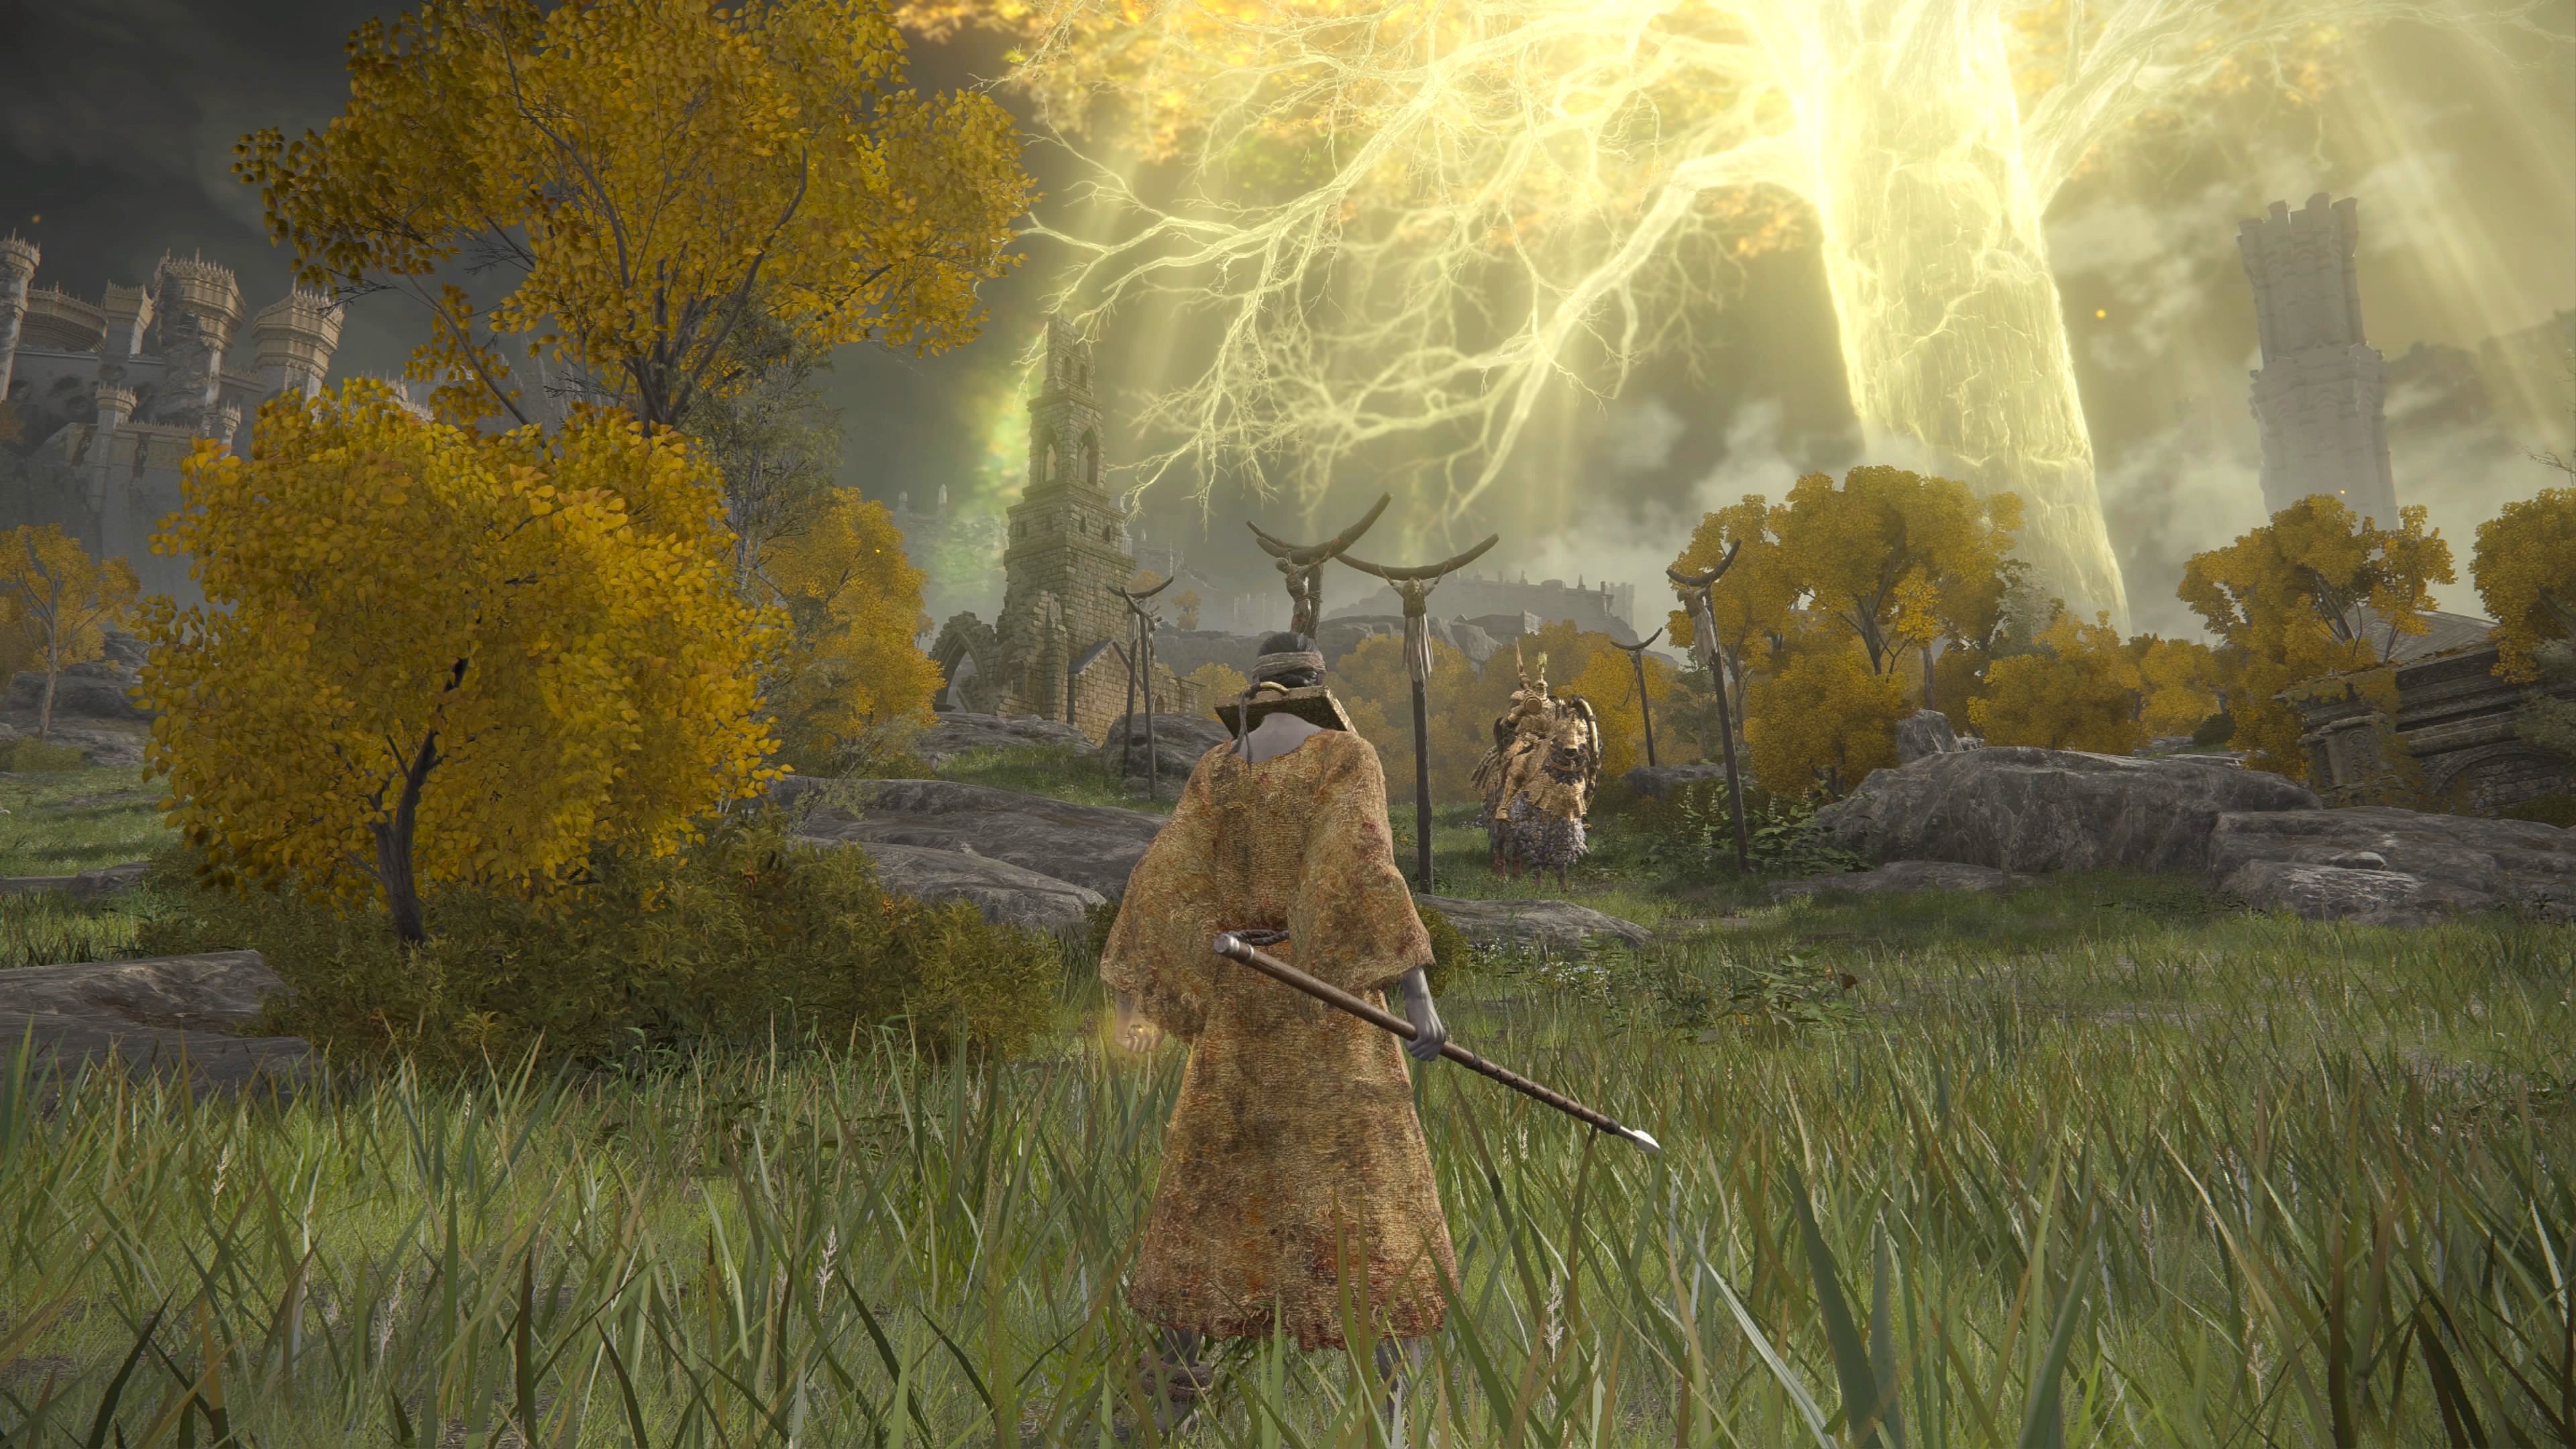 A Tarnished wielding a spear looks at the Tree Sentinel, with the Erdtree in the background, in a screenshot from Elden Ring.